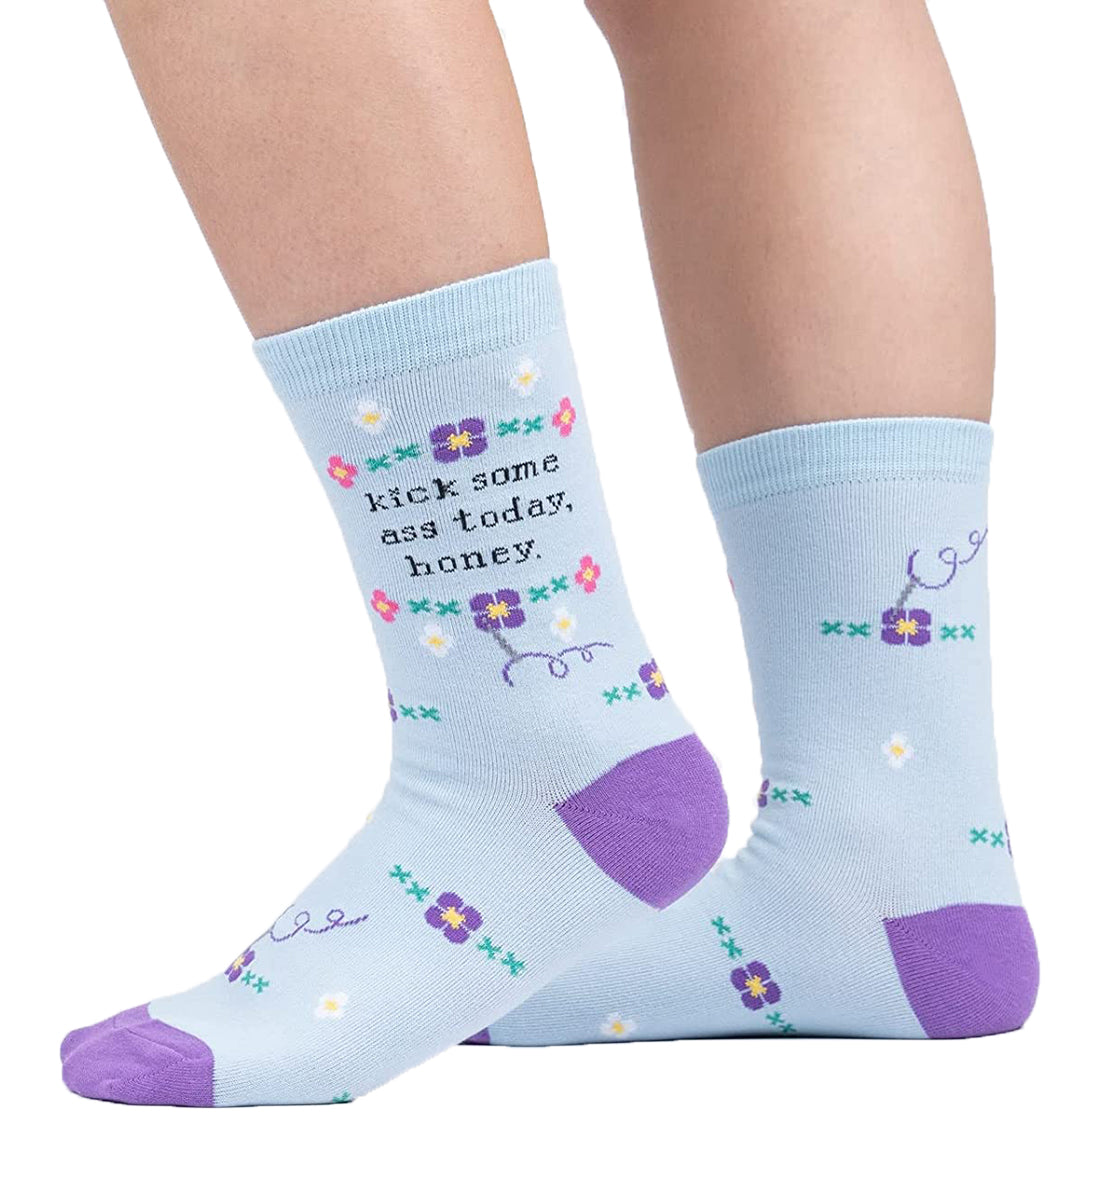 SOCK it to me Women&#39;s Crew Socks (W0409),Kick Some Ass Today - Kick Some Ass Today,One Size